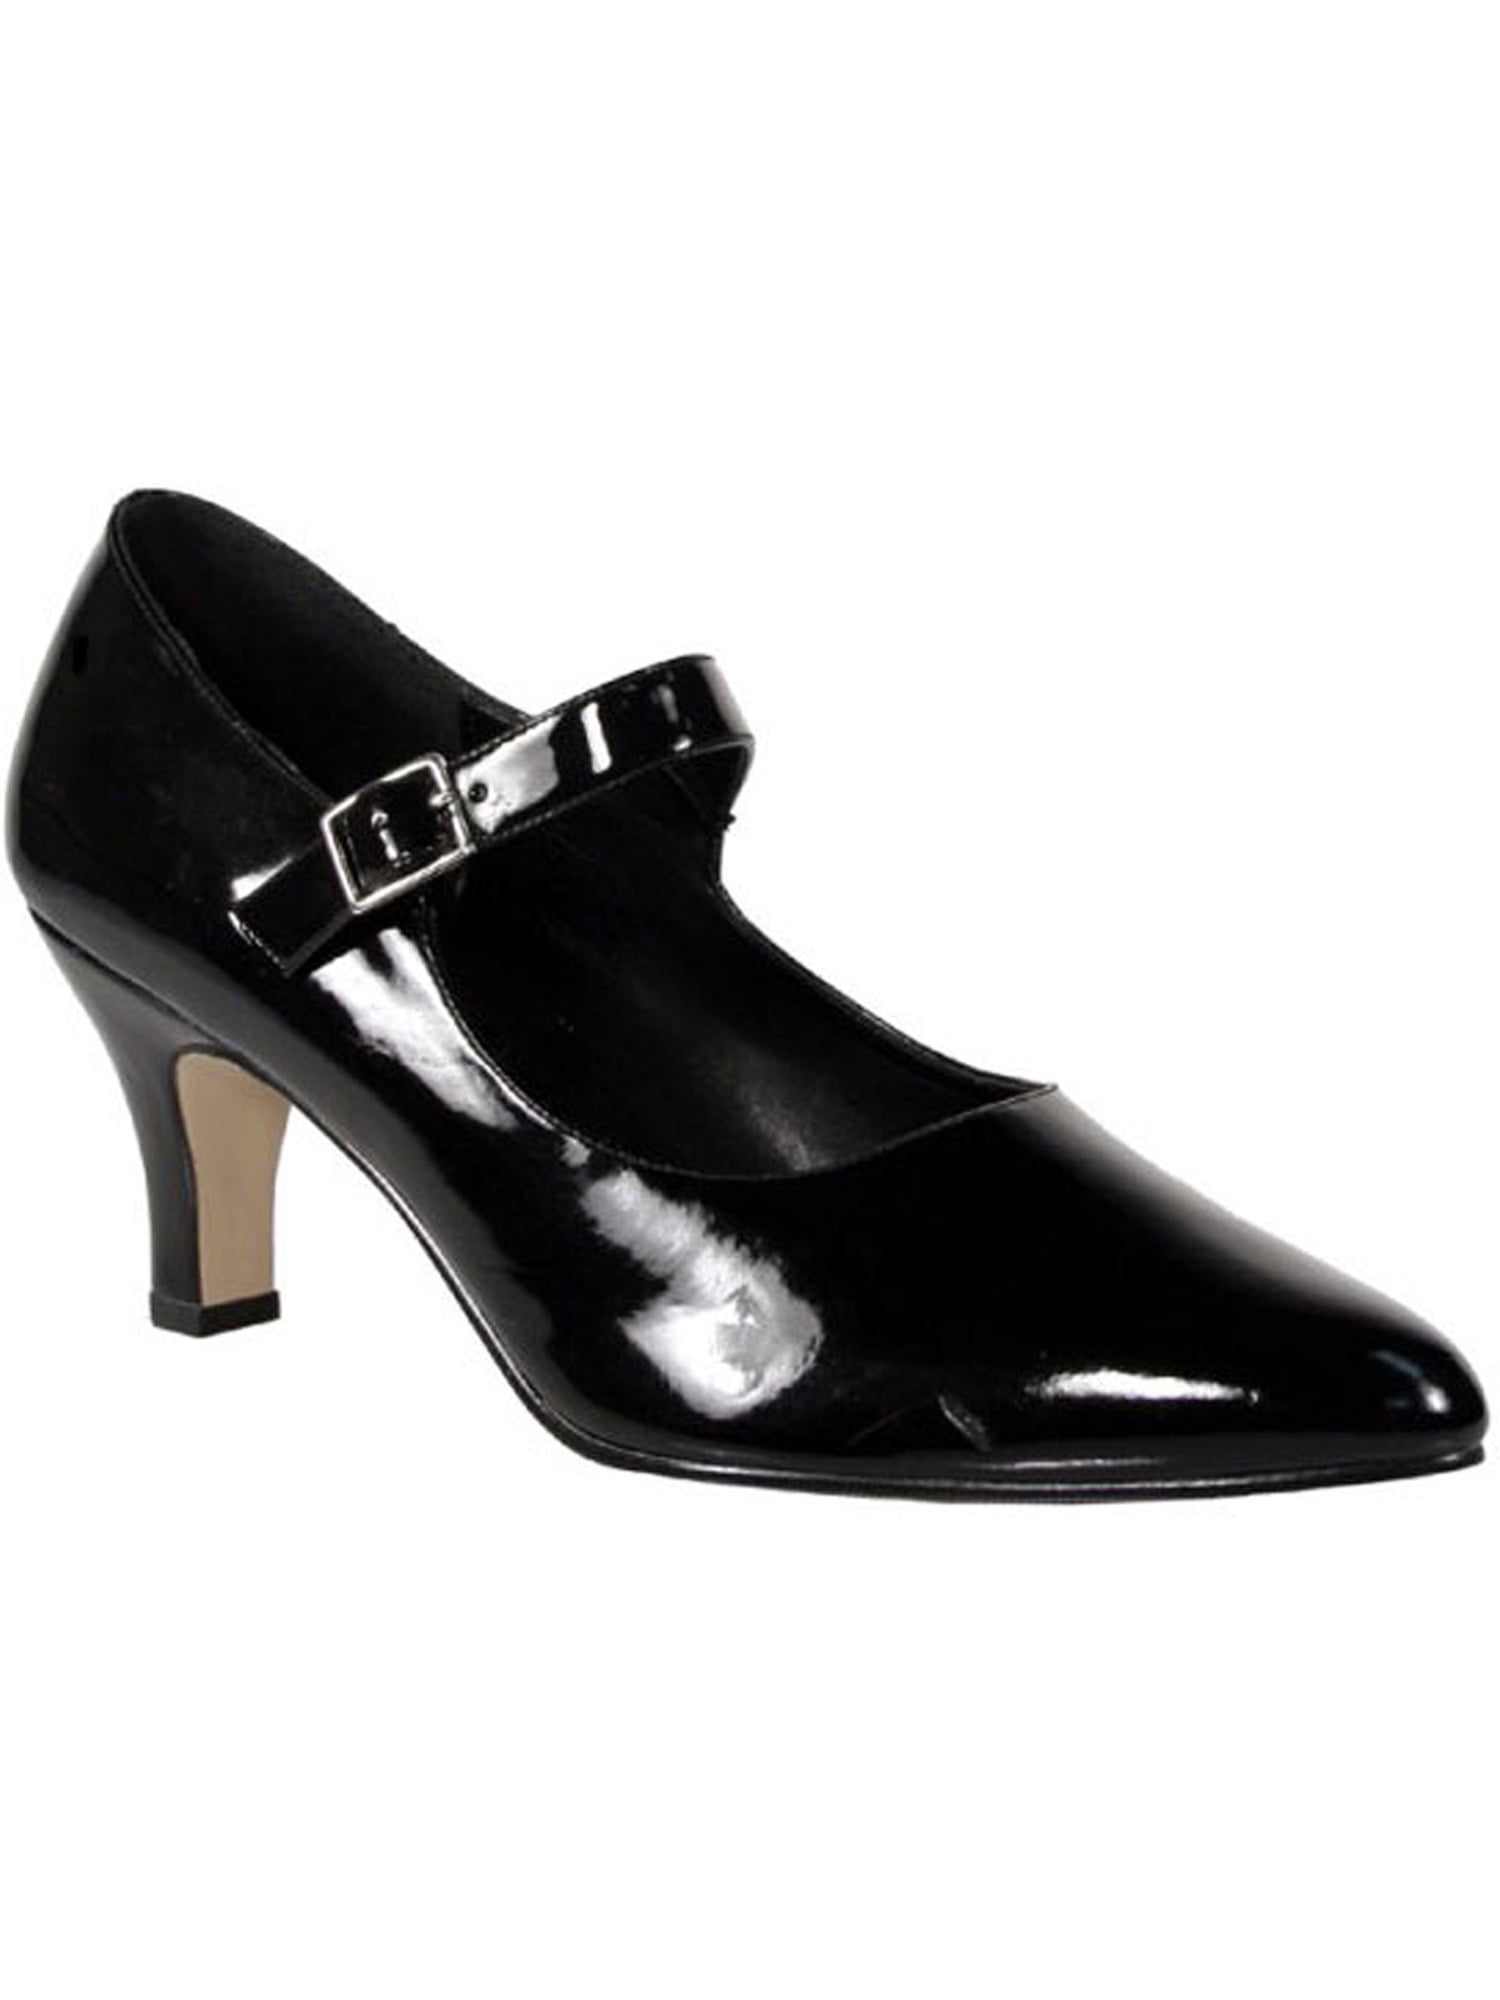 3 Inch Heel Black Mary Jane Shoes Pumps 